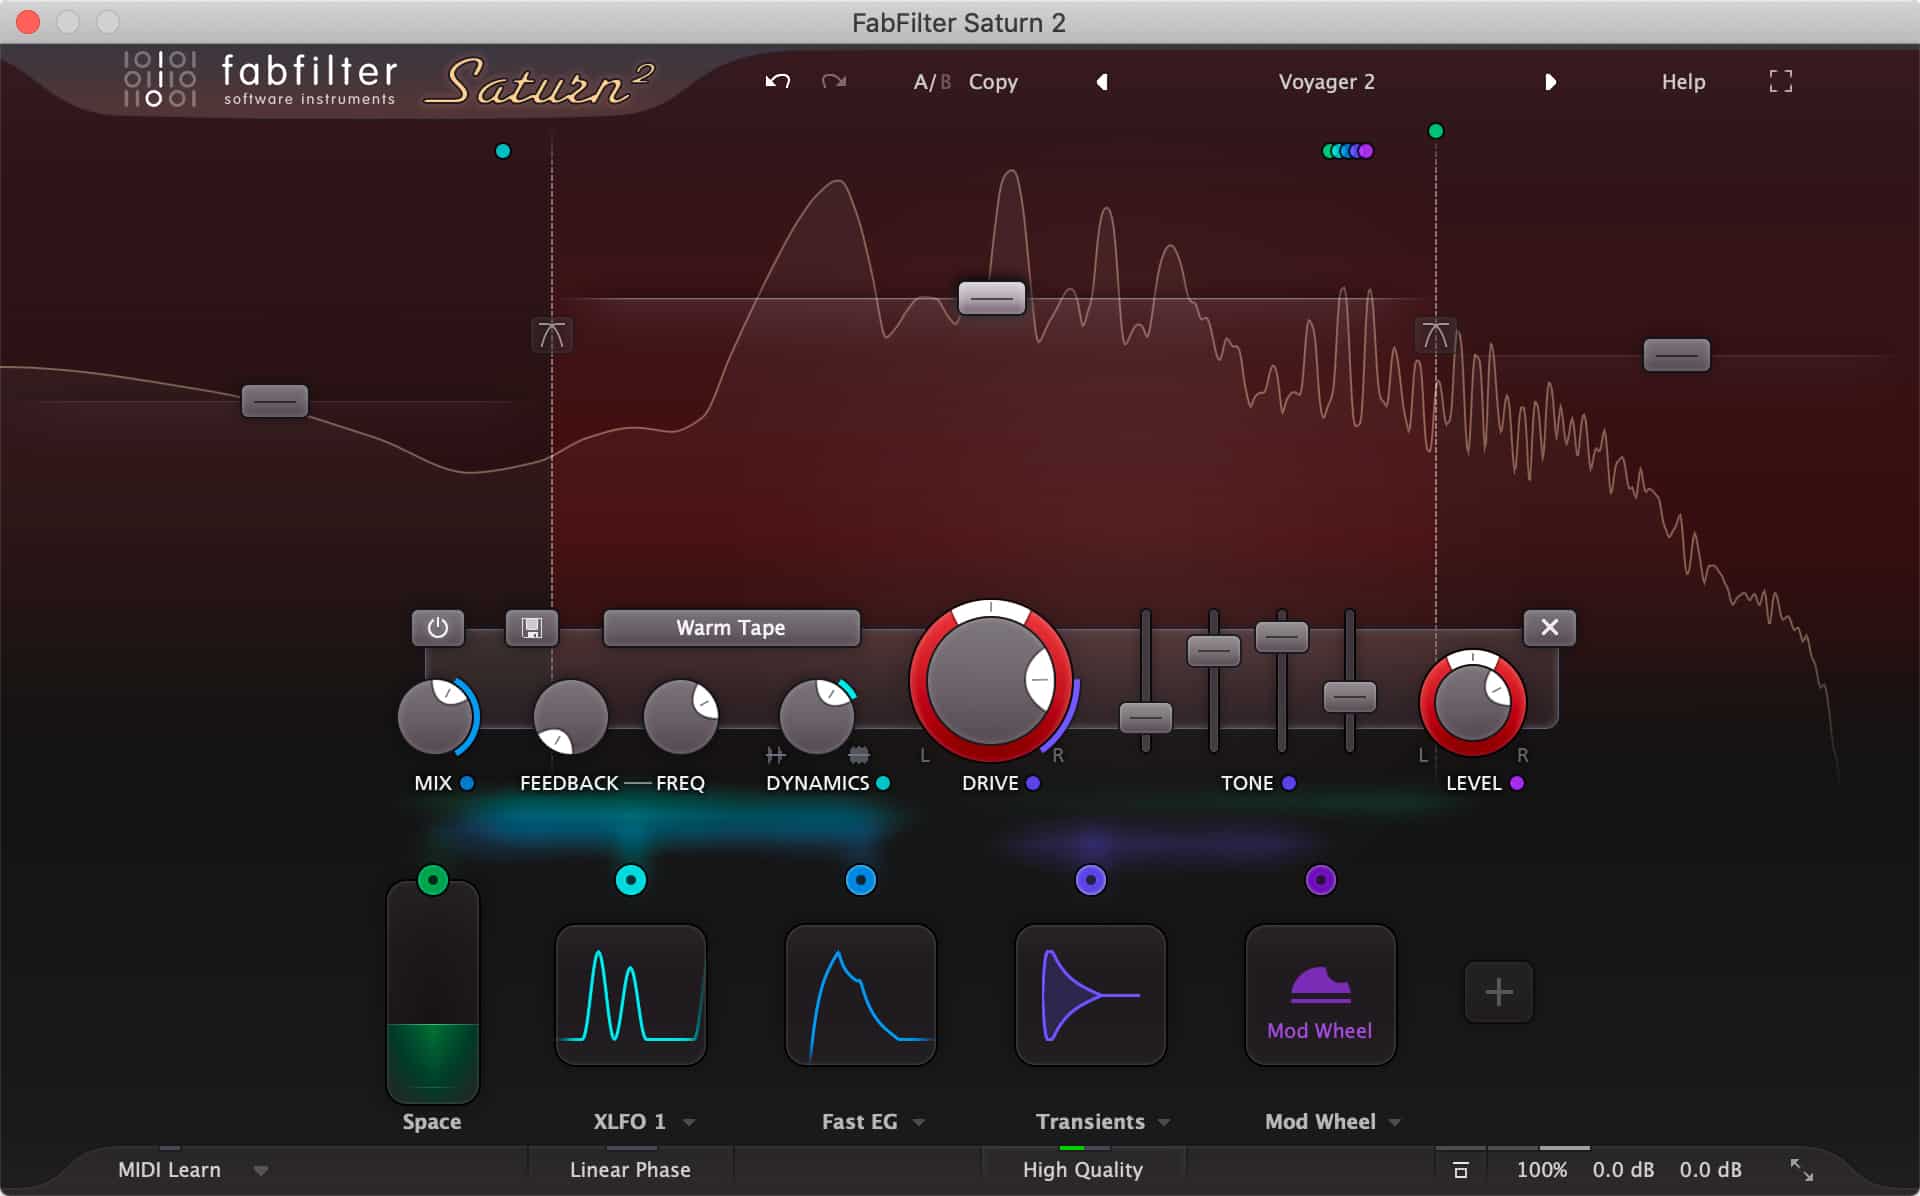 FabFilter Releases FabFilter Saturn 2 – a Multiband Distortion and Saturation Effect